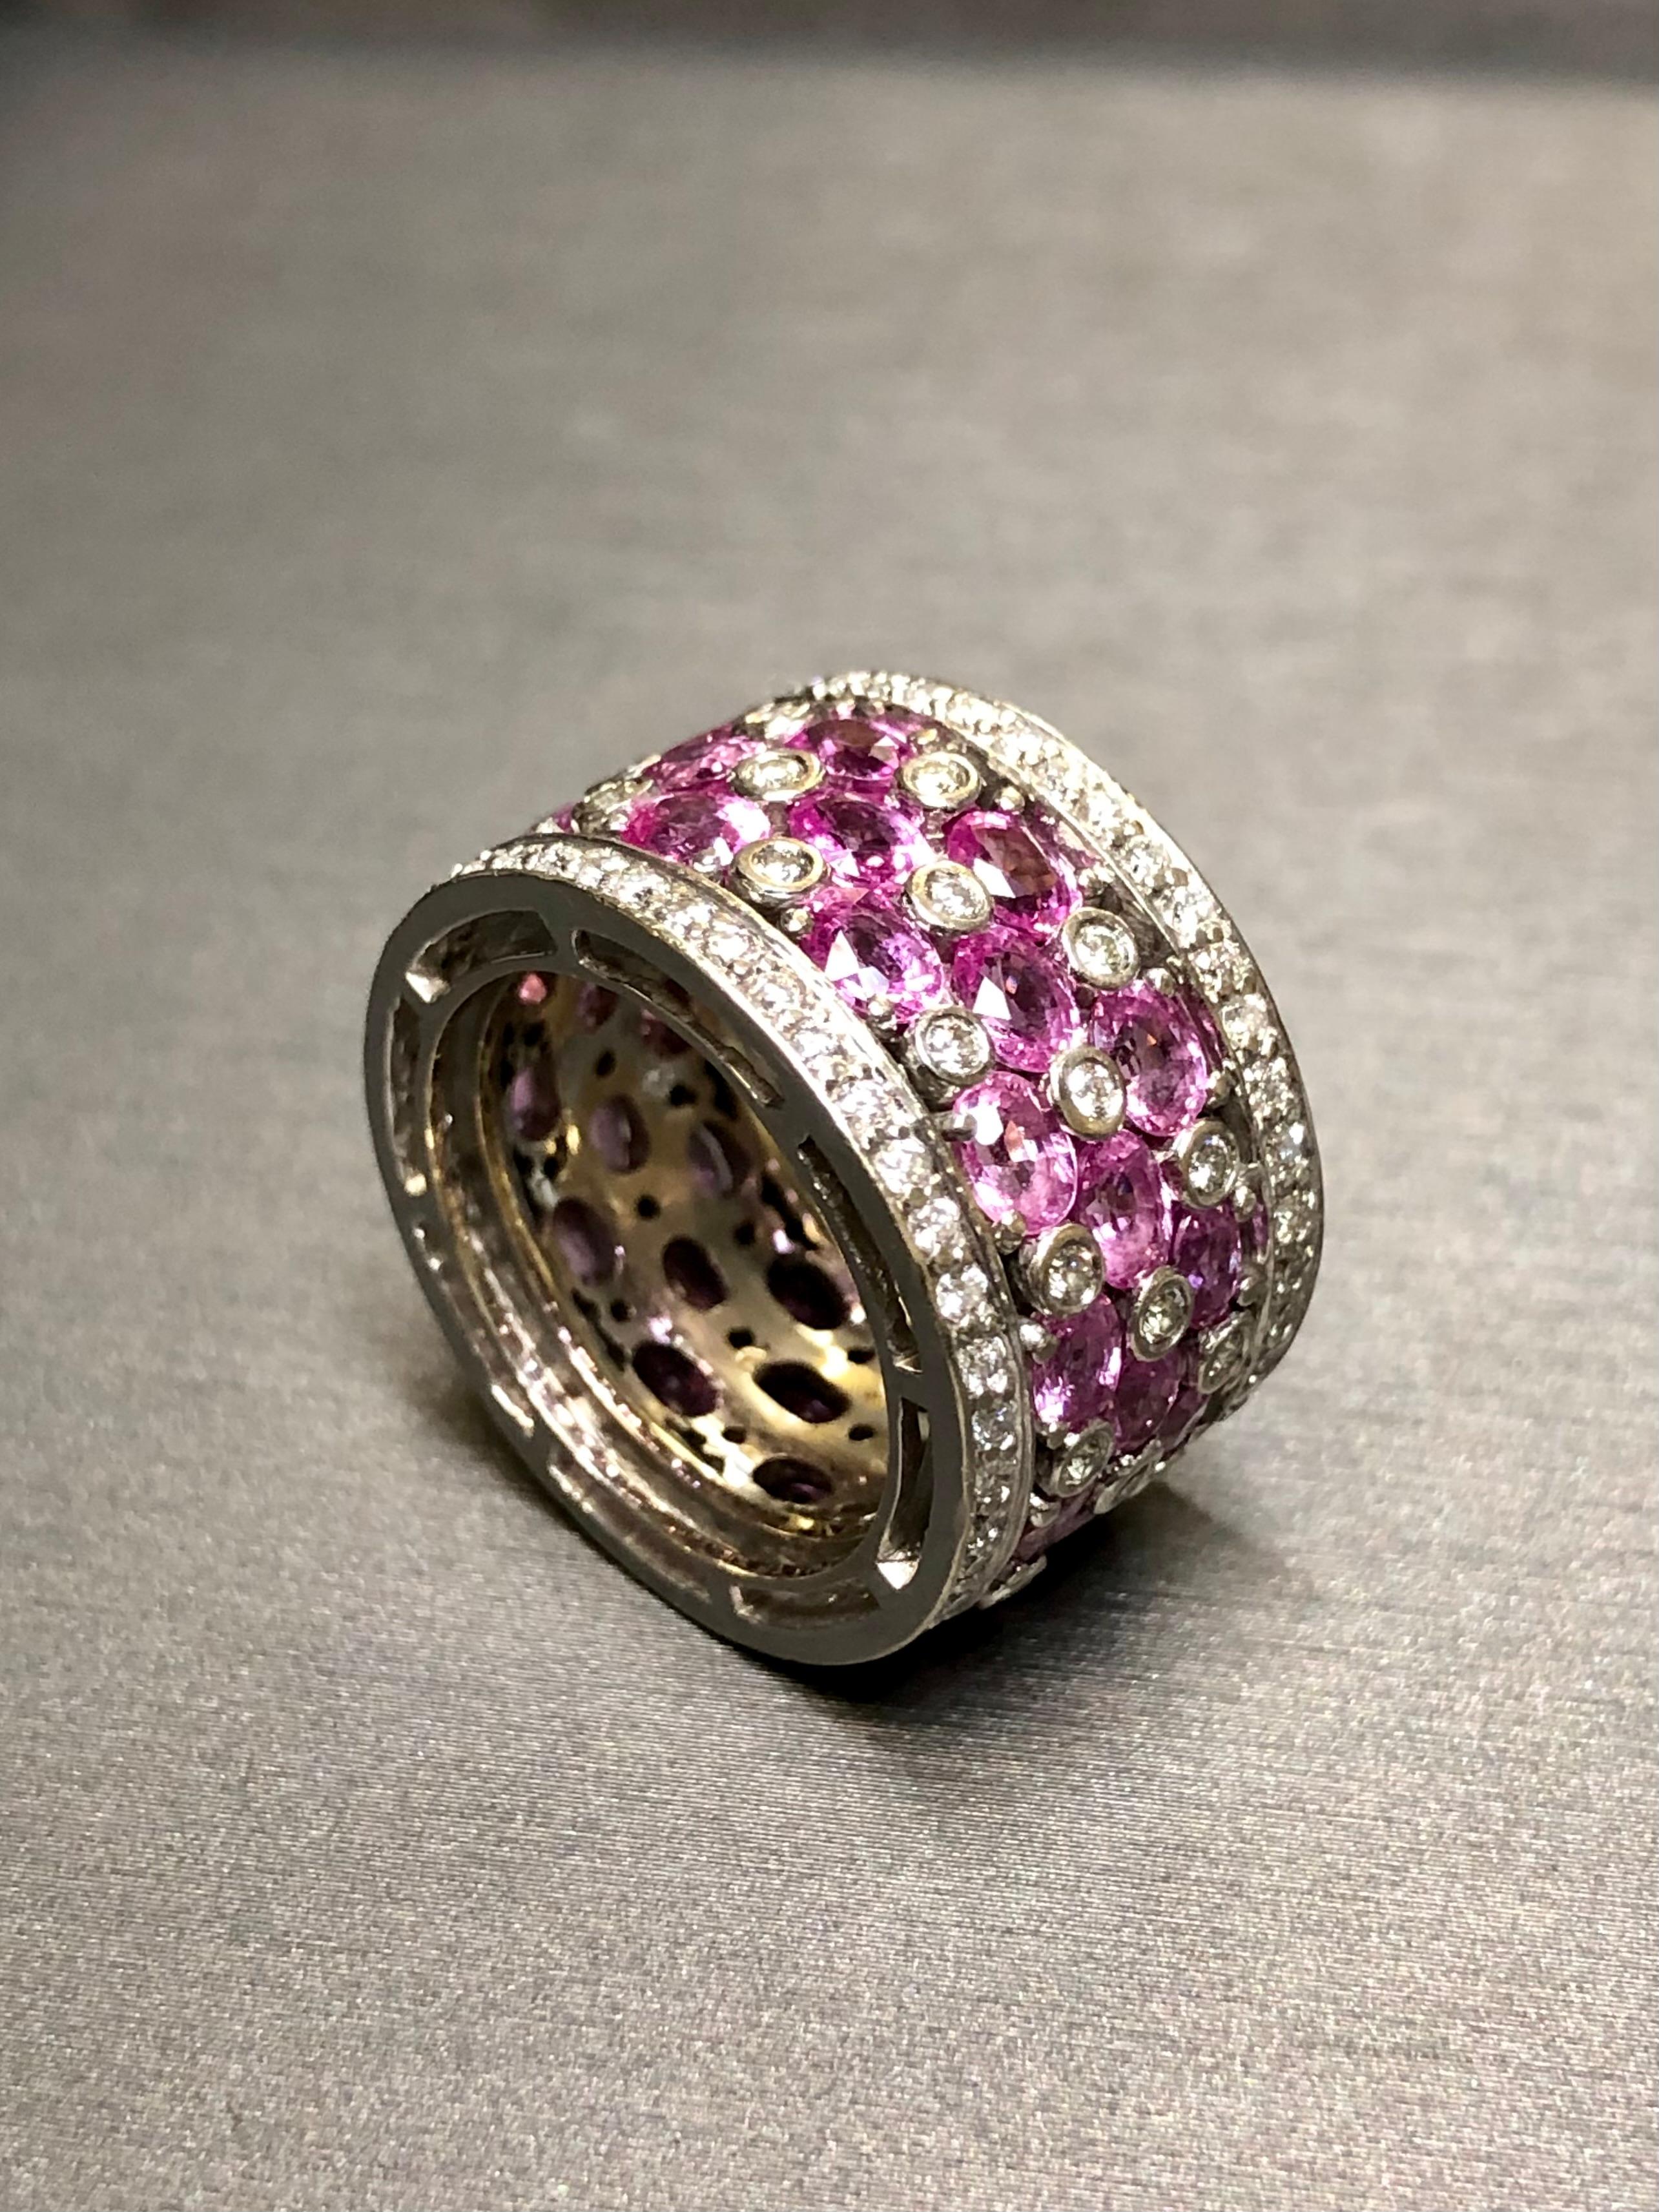 Oval Cut Estate 18K Pink Sapphire Diamond Wide Band Cocktail Ring 10.86cttw Sz 6.25 For Sale